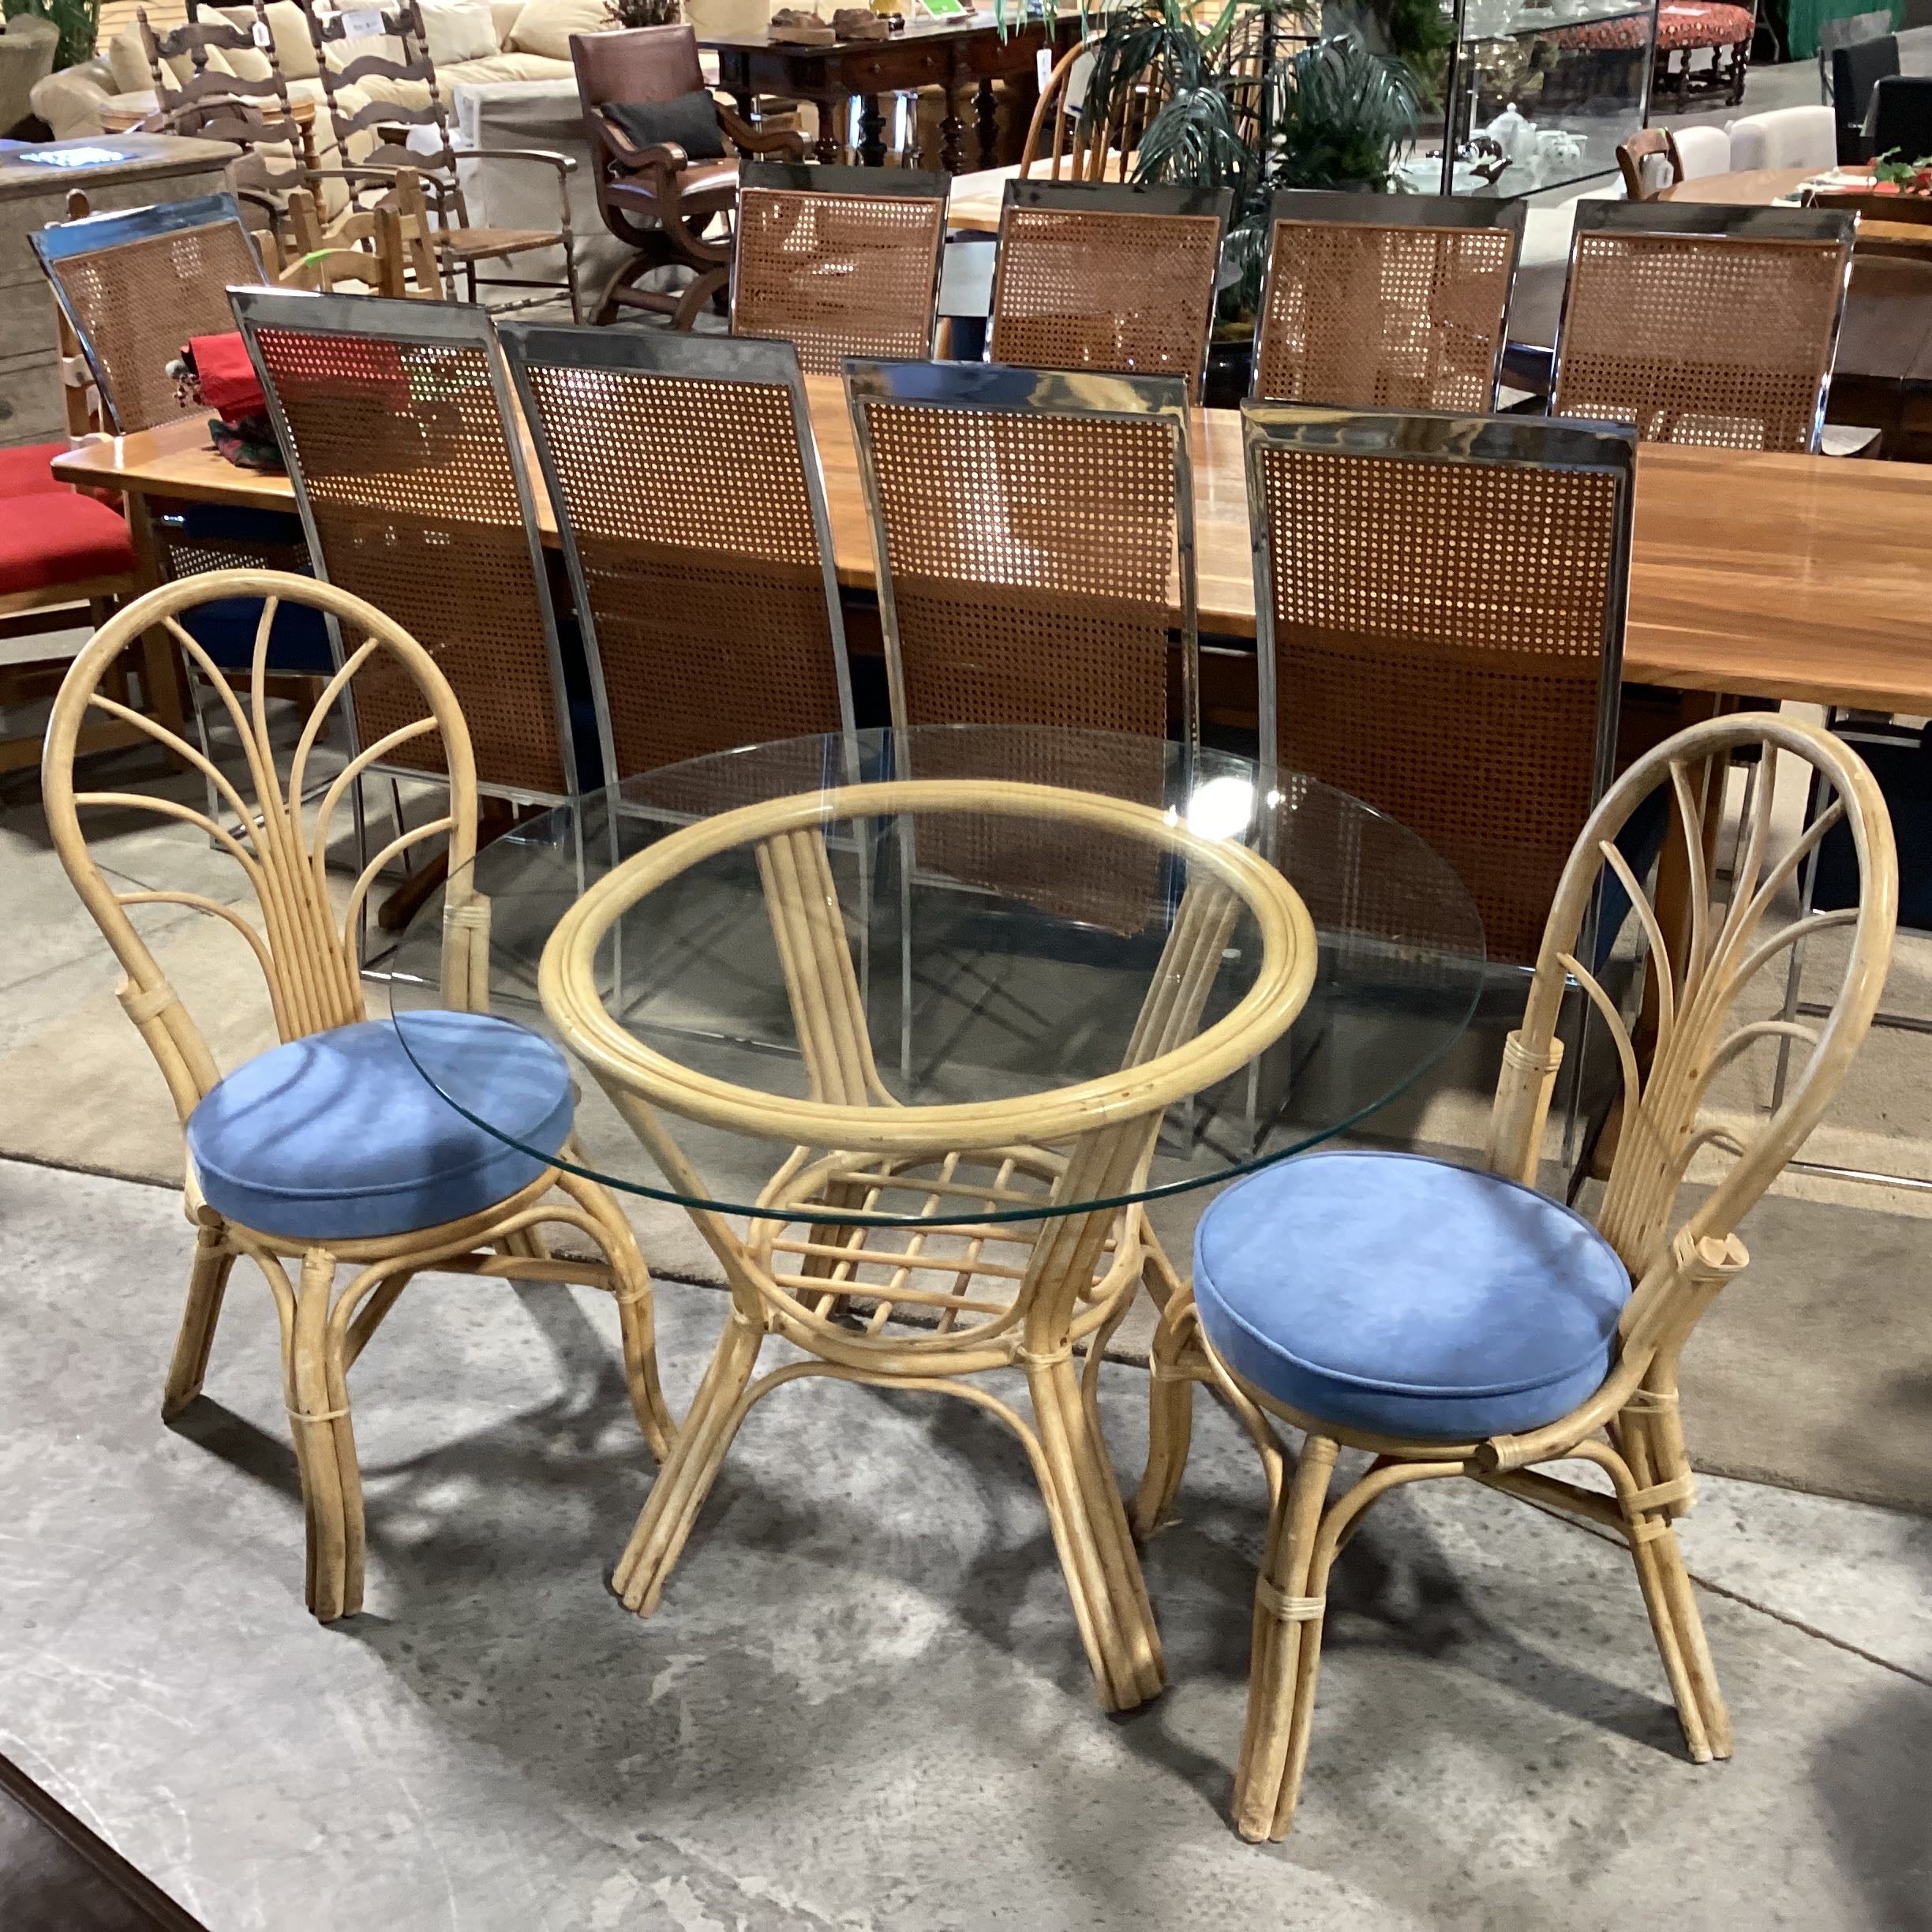 Rattan & Bamboo Style Glass Round Table with 2 Chairs Dining Set